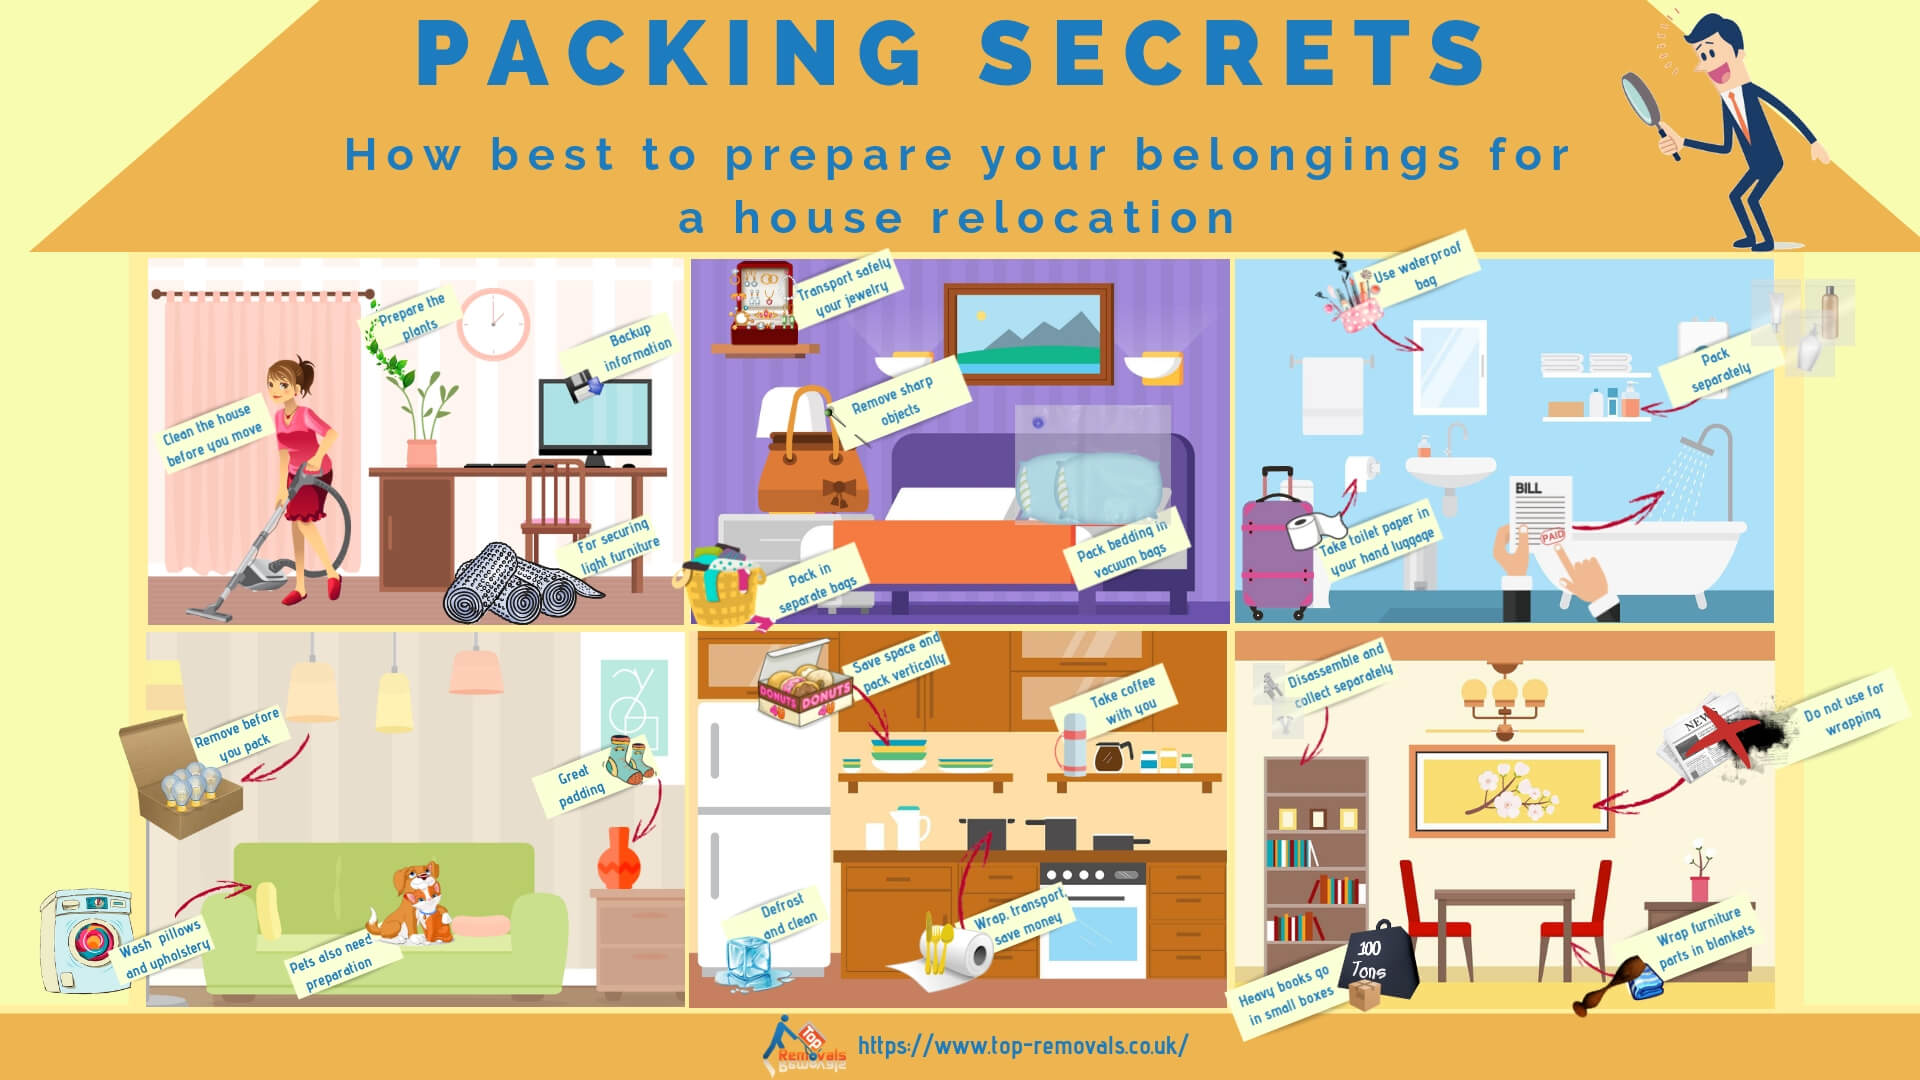 Packing-Secrets-infographic-plaza